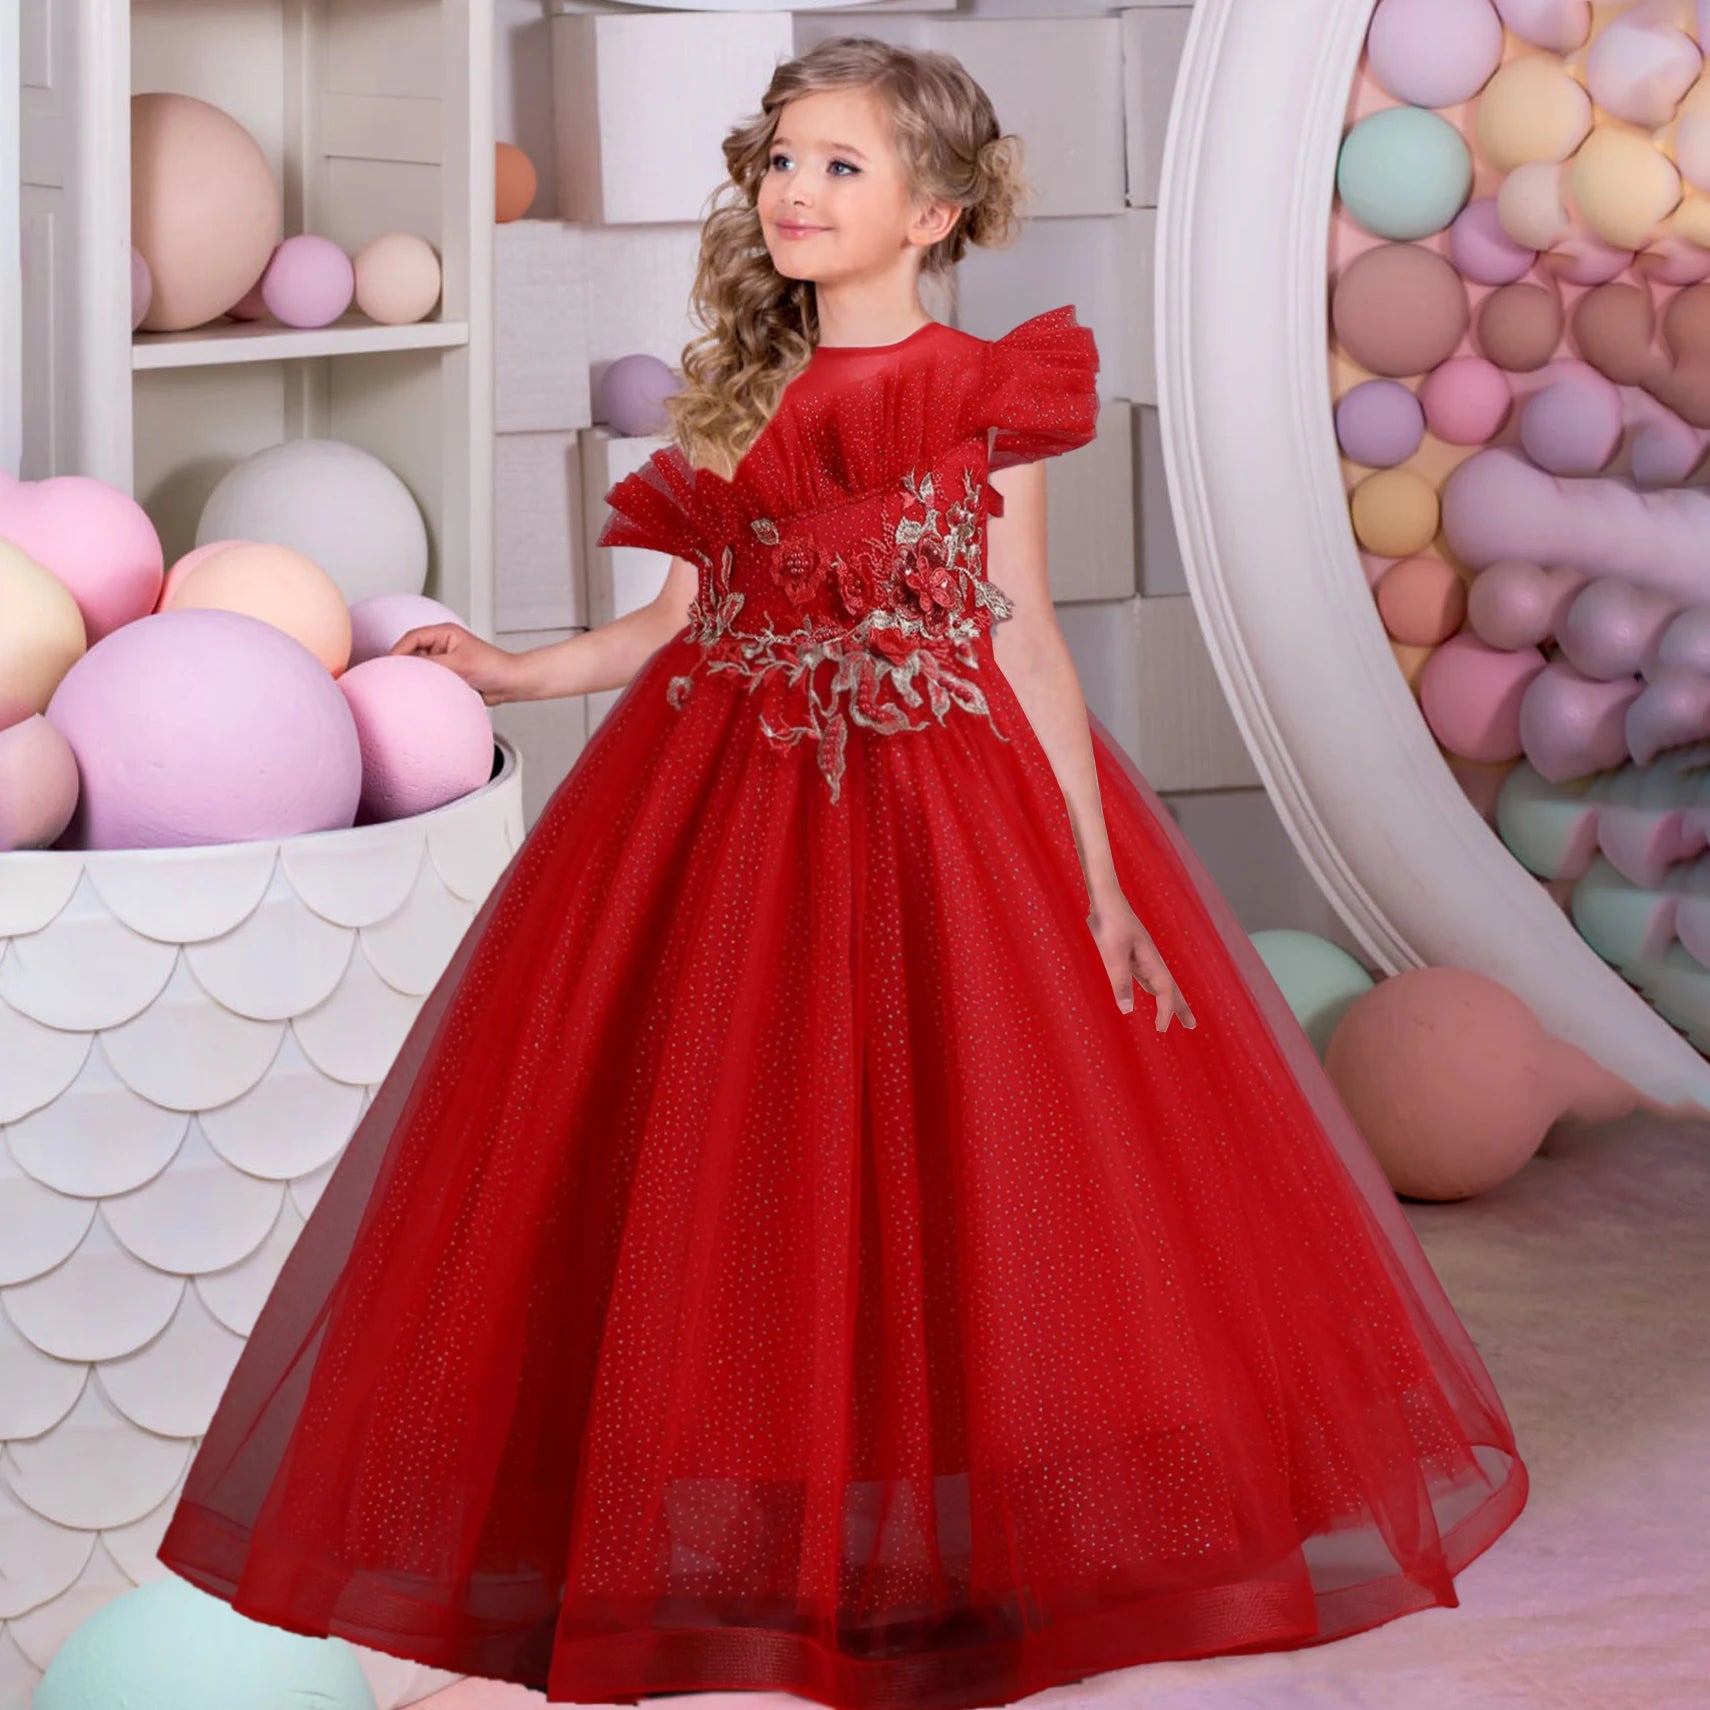 Tulle Flower Girl Dress with floral embroidery red by Baby Minaj Cruz